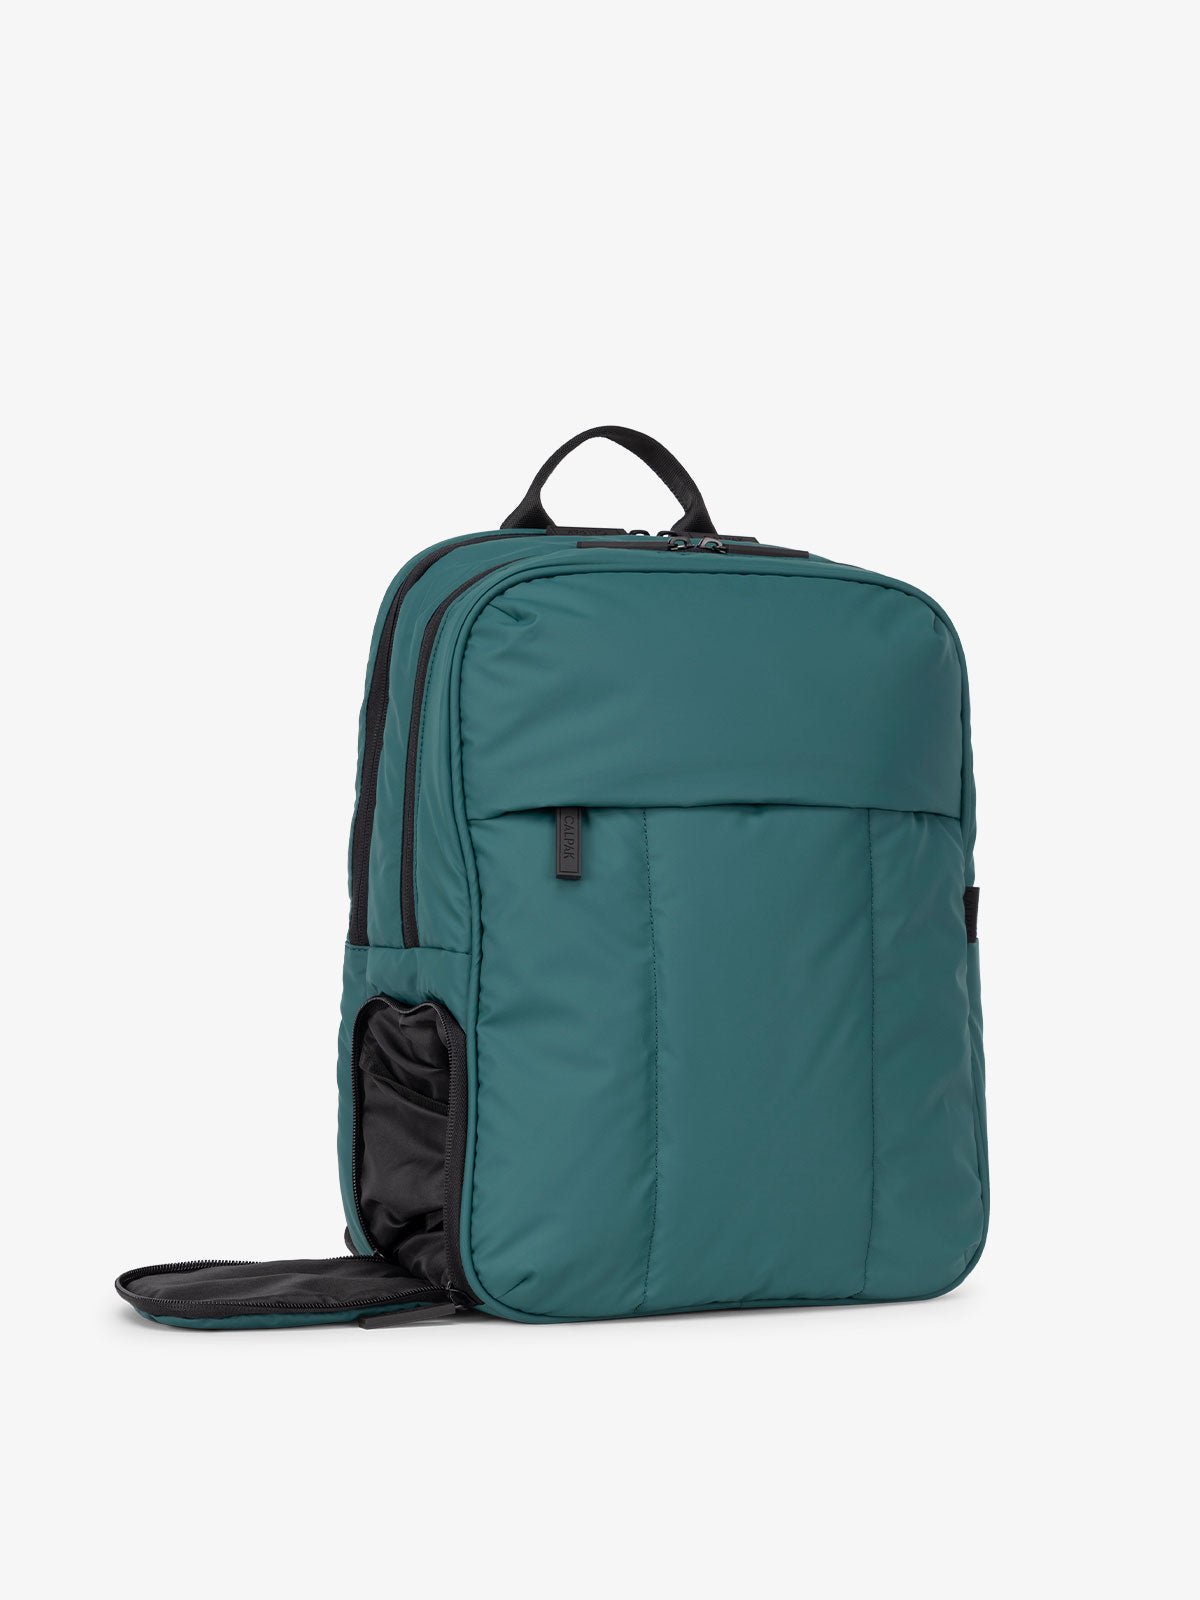 shoe compartment for Luka laptop backpack in kale green